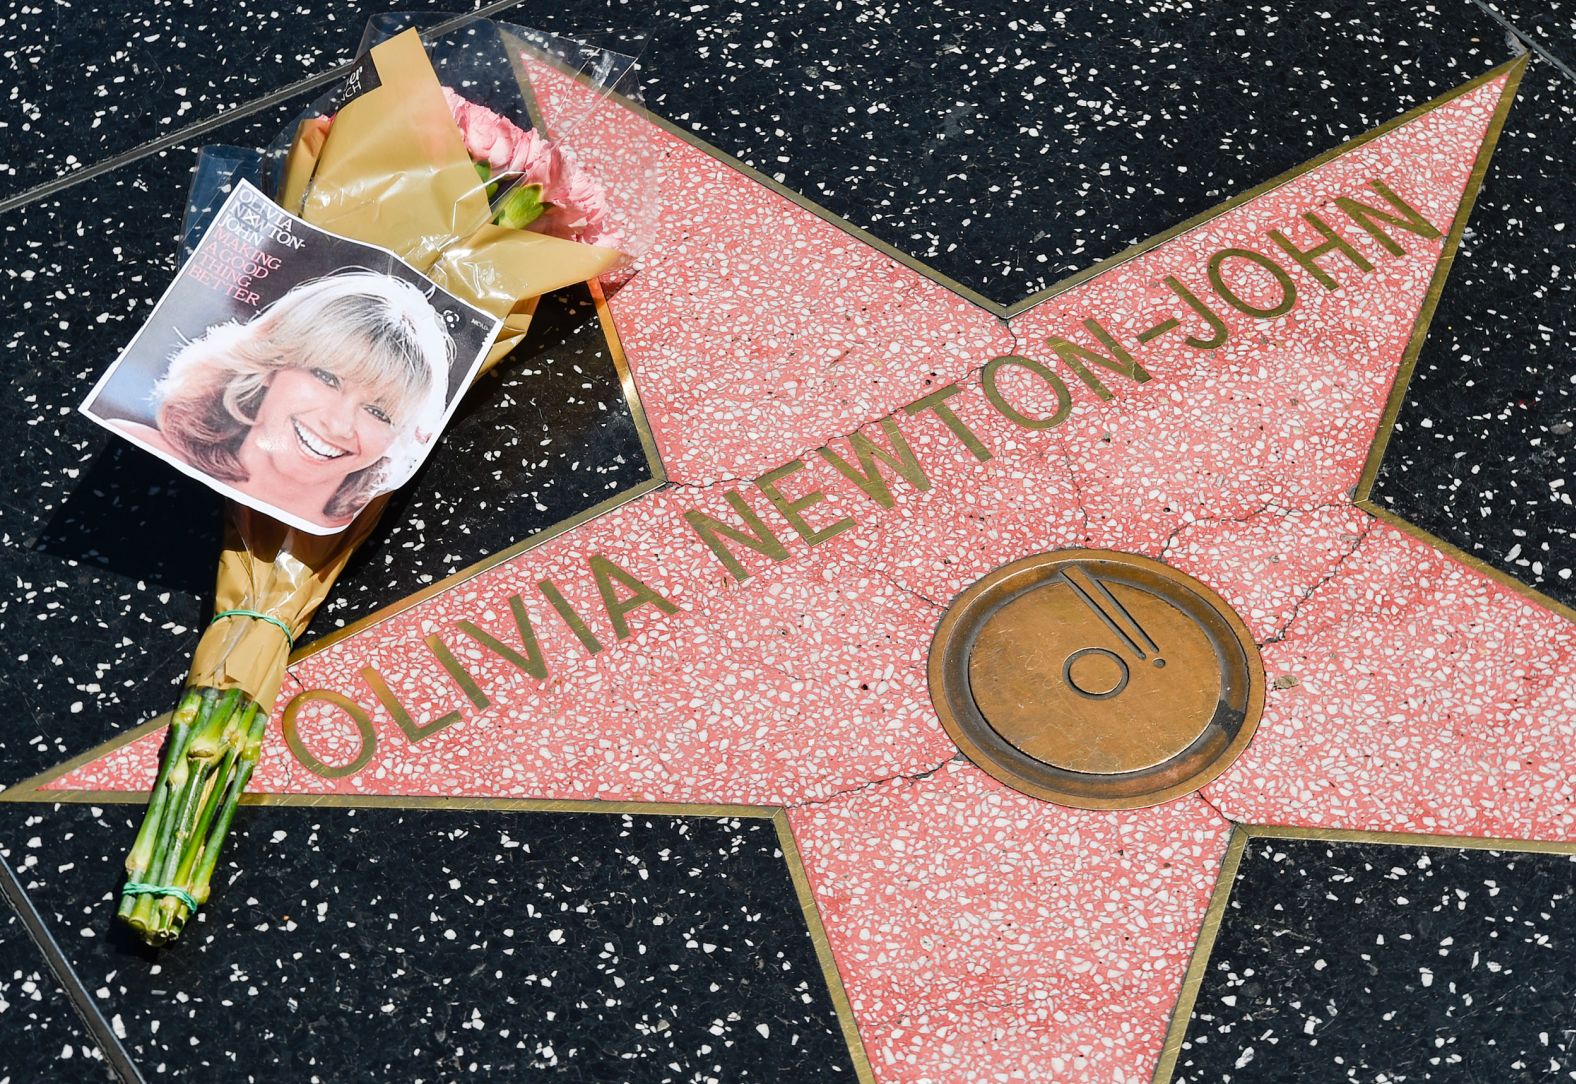 Flowers are seen on Olivia Newton-John's star on the Hollywood Walk of Fame on Monday, August 8. <a href="https://www.cnn.com/2022/08/08/entertainment/gallery/olivia-newton-john/index.html" target="_blank">Newton-John,</a> one of the biggest pop stars of the '70s who charmed generations of viewers in the movie musical "Grease," <a href="https://www.cnn.com/2022/08/08/entertainment/olivia-newton-john-obit/index.html" target="_blank">died Monday</a> at the age of 73.